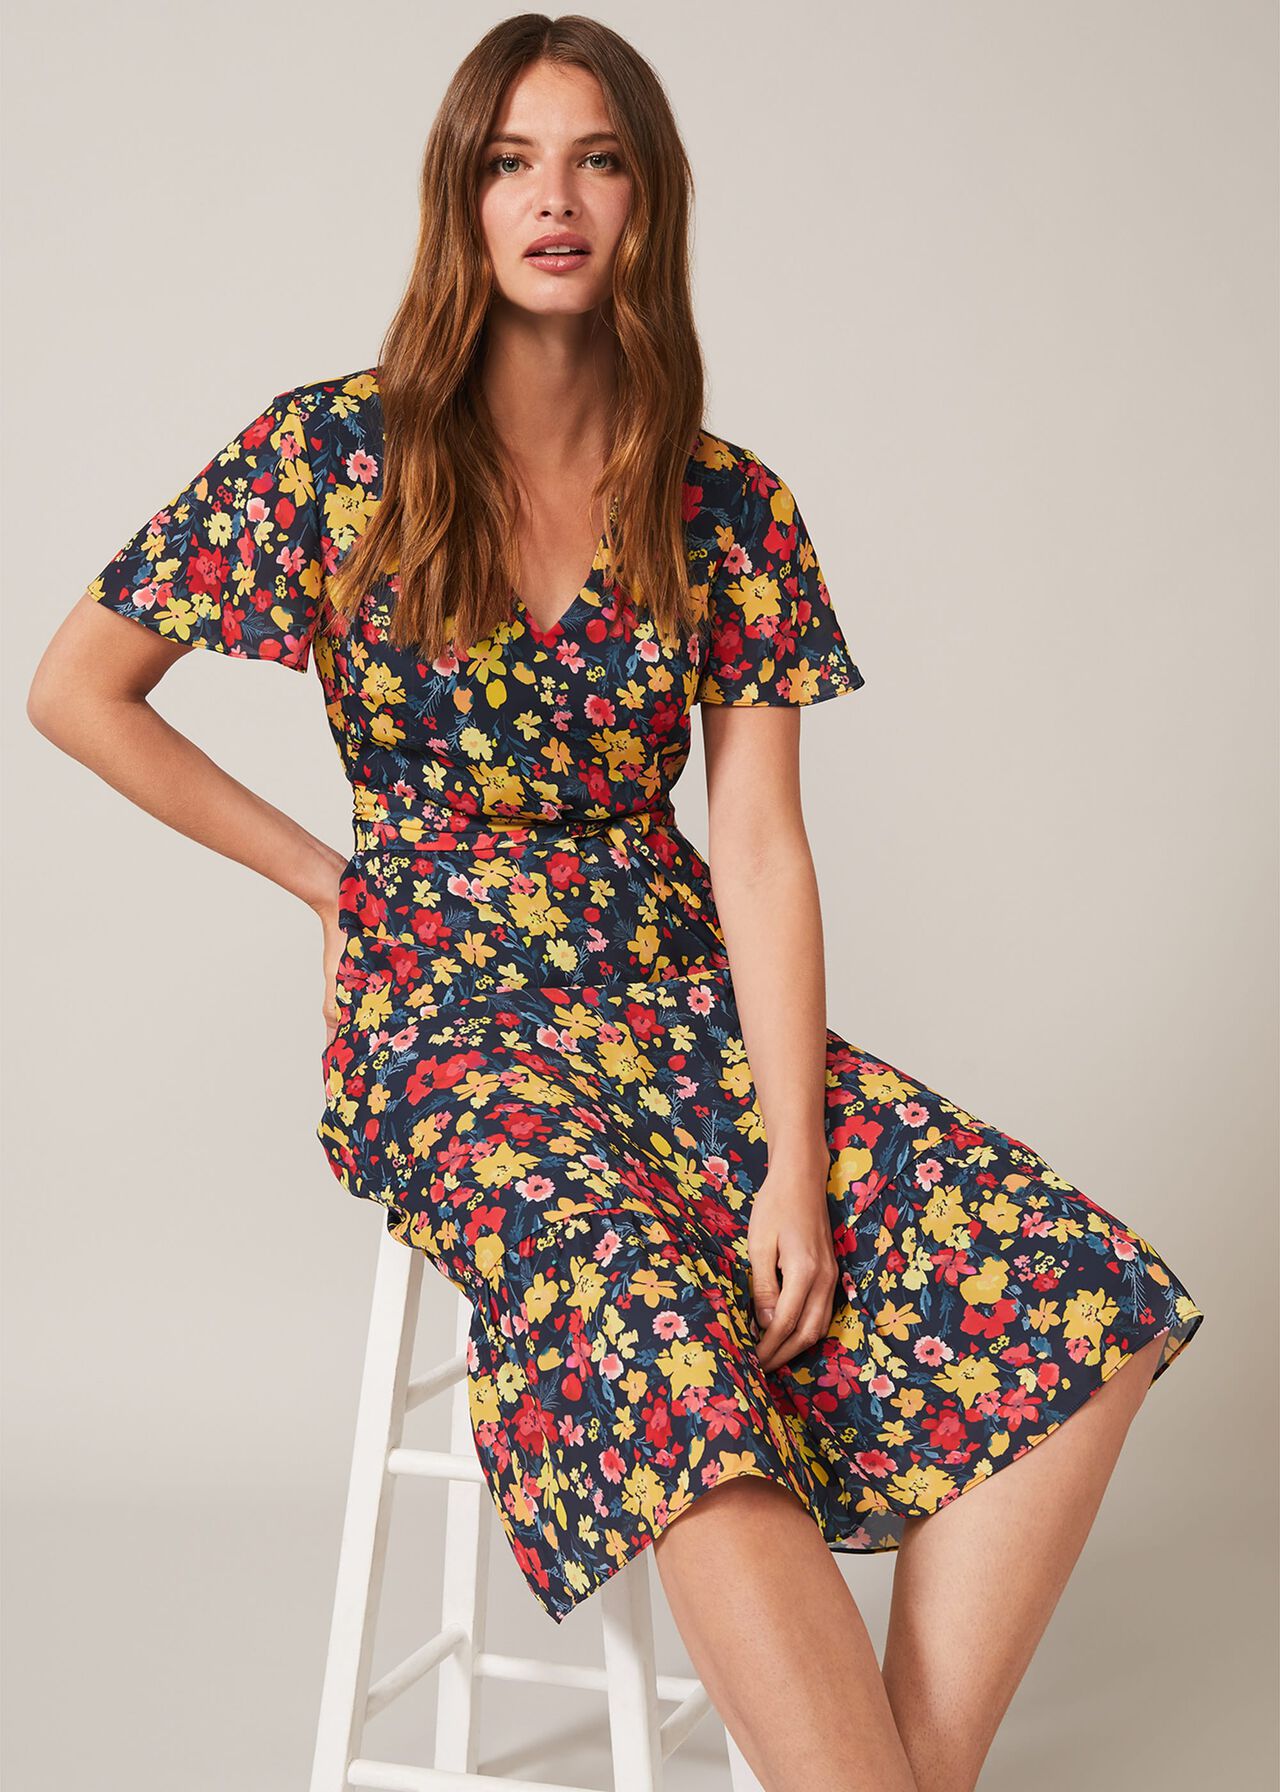 Ailee Floral Printed Dress | Phase Eight